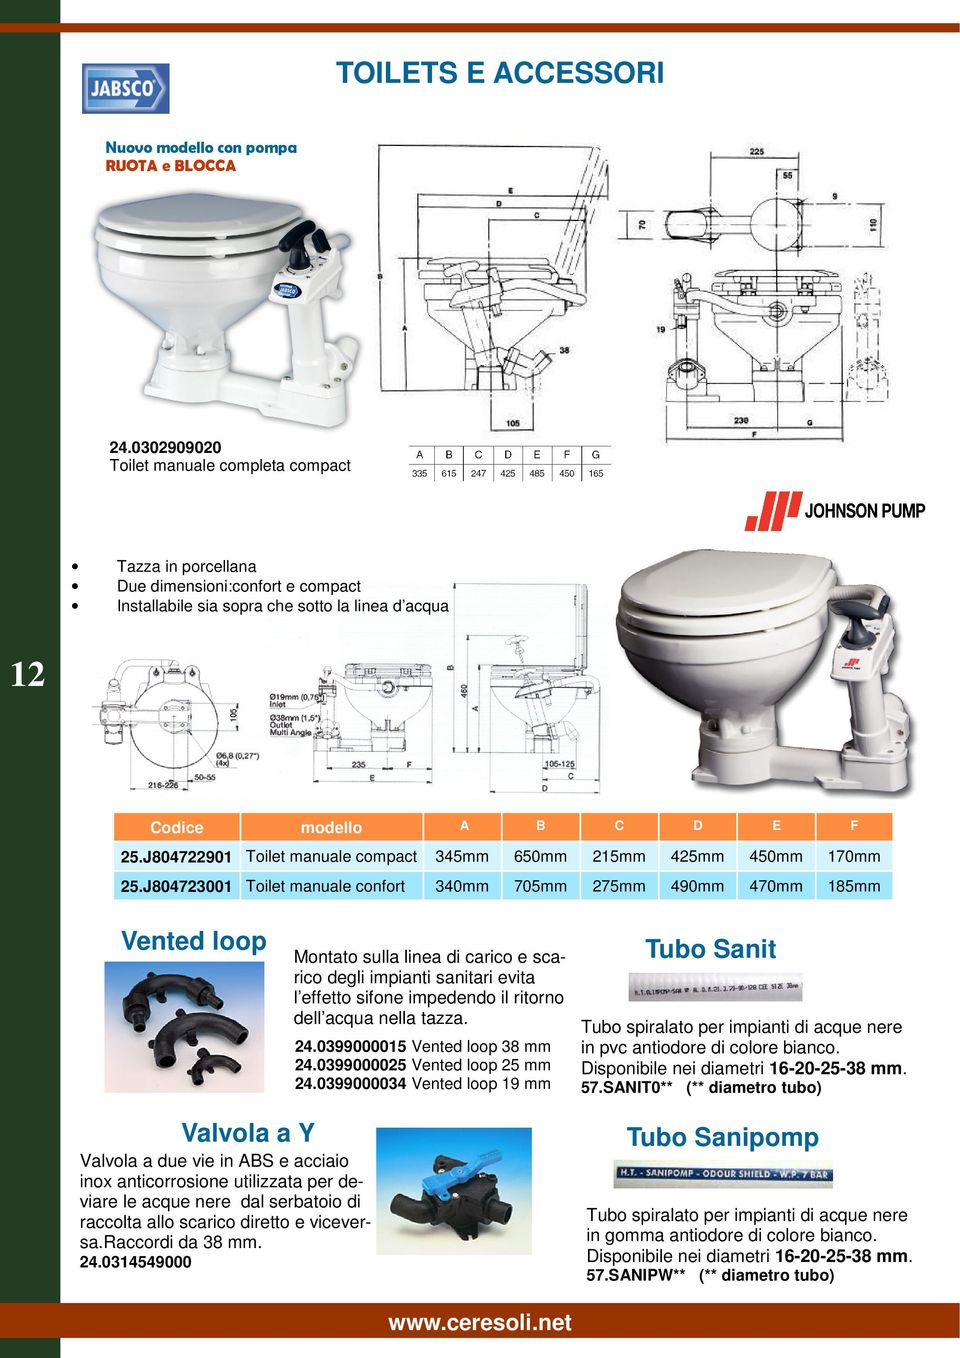 J804722901 Toilet manuale compact 345mm 650mm 215mm 425mm 25.